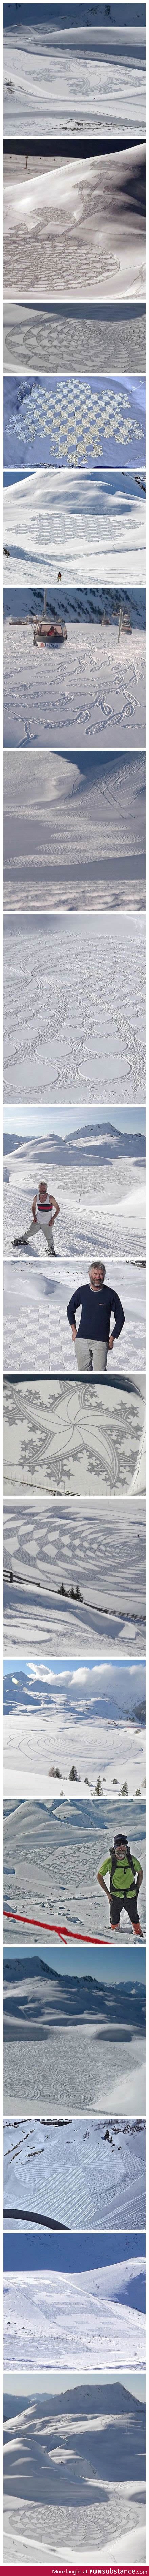 Epic snow drawings using his feet